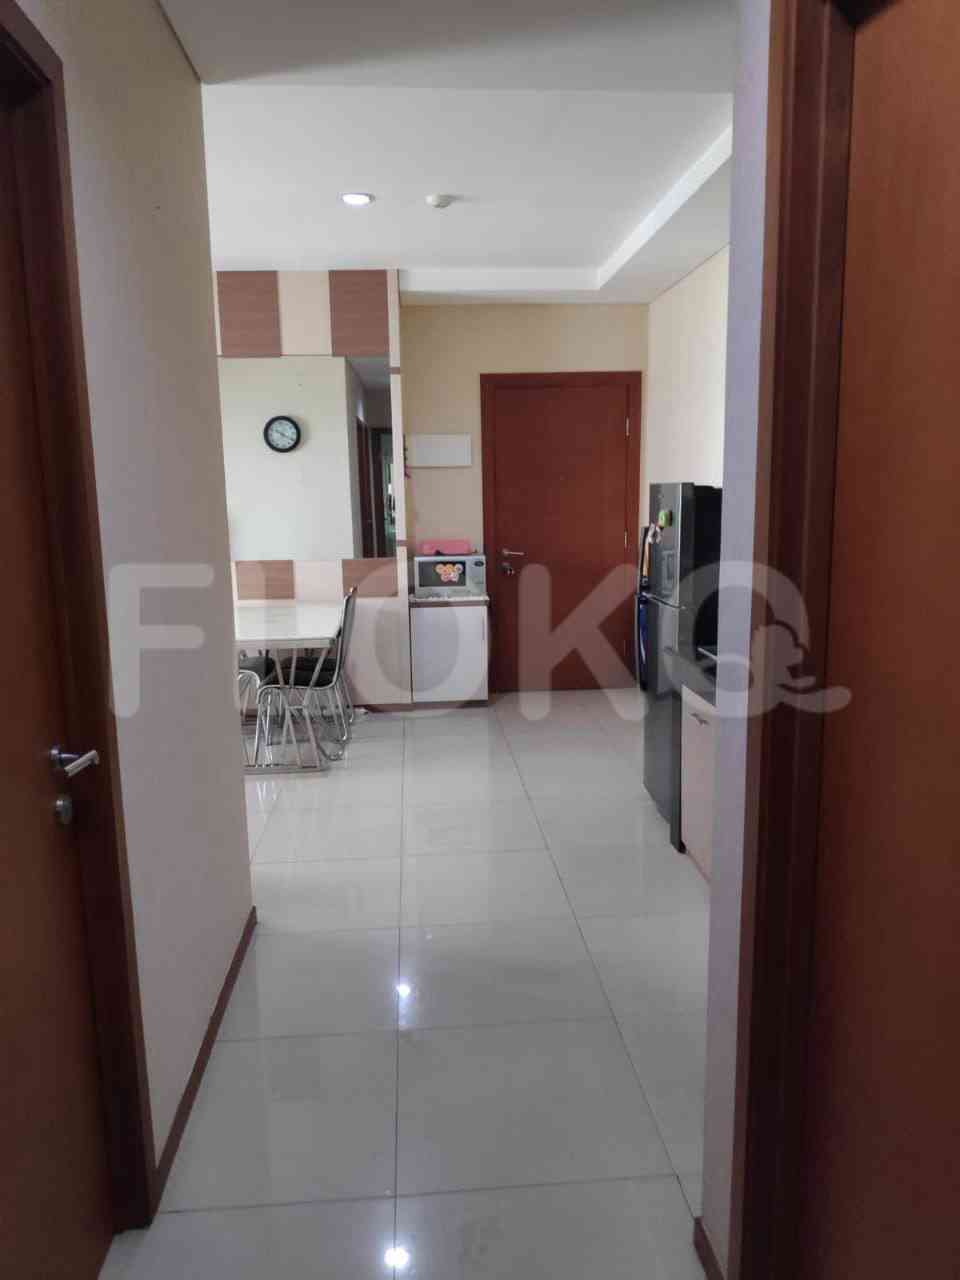 2 Bedroom on 17th Floor for Rent in Thamrin Residence Apartment - fth9a0 5